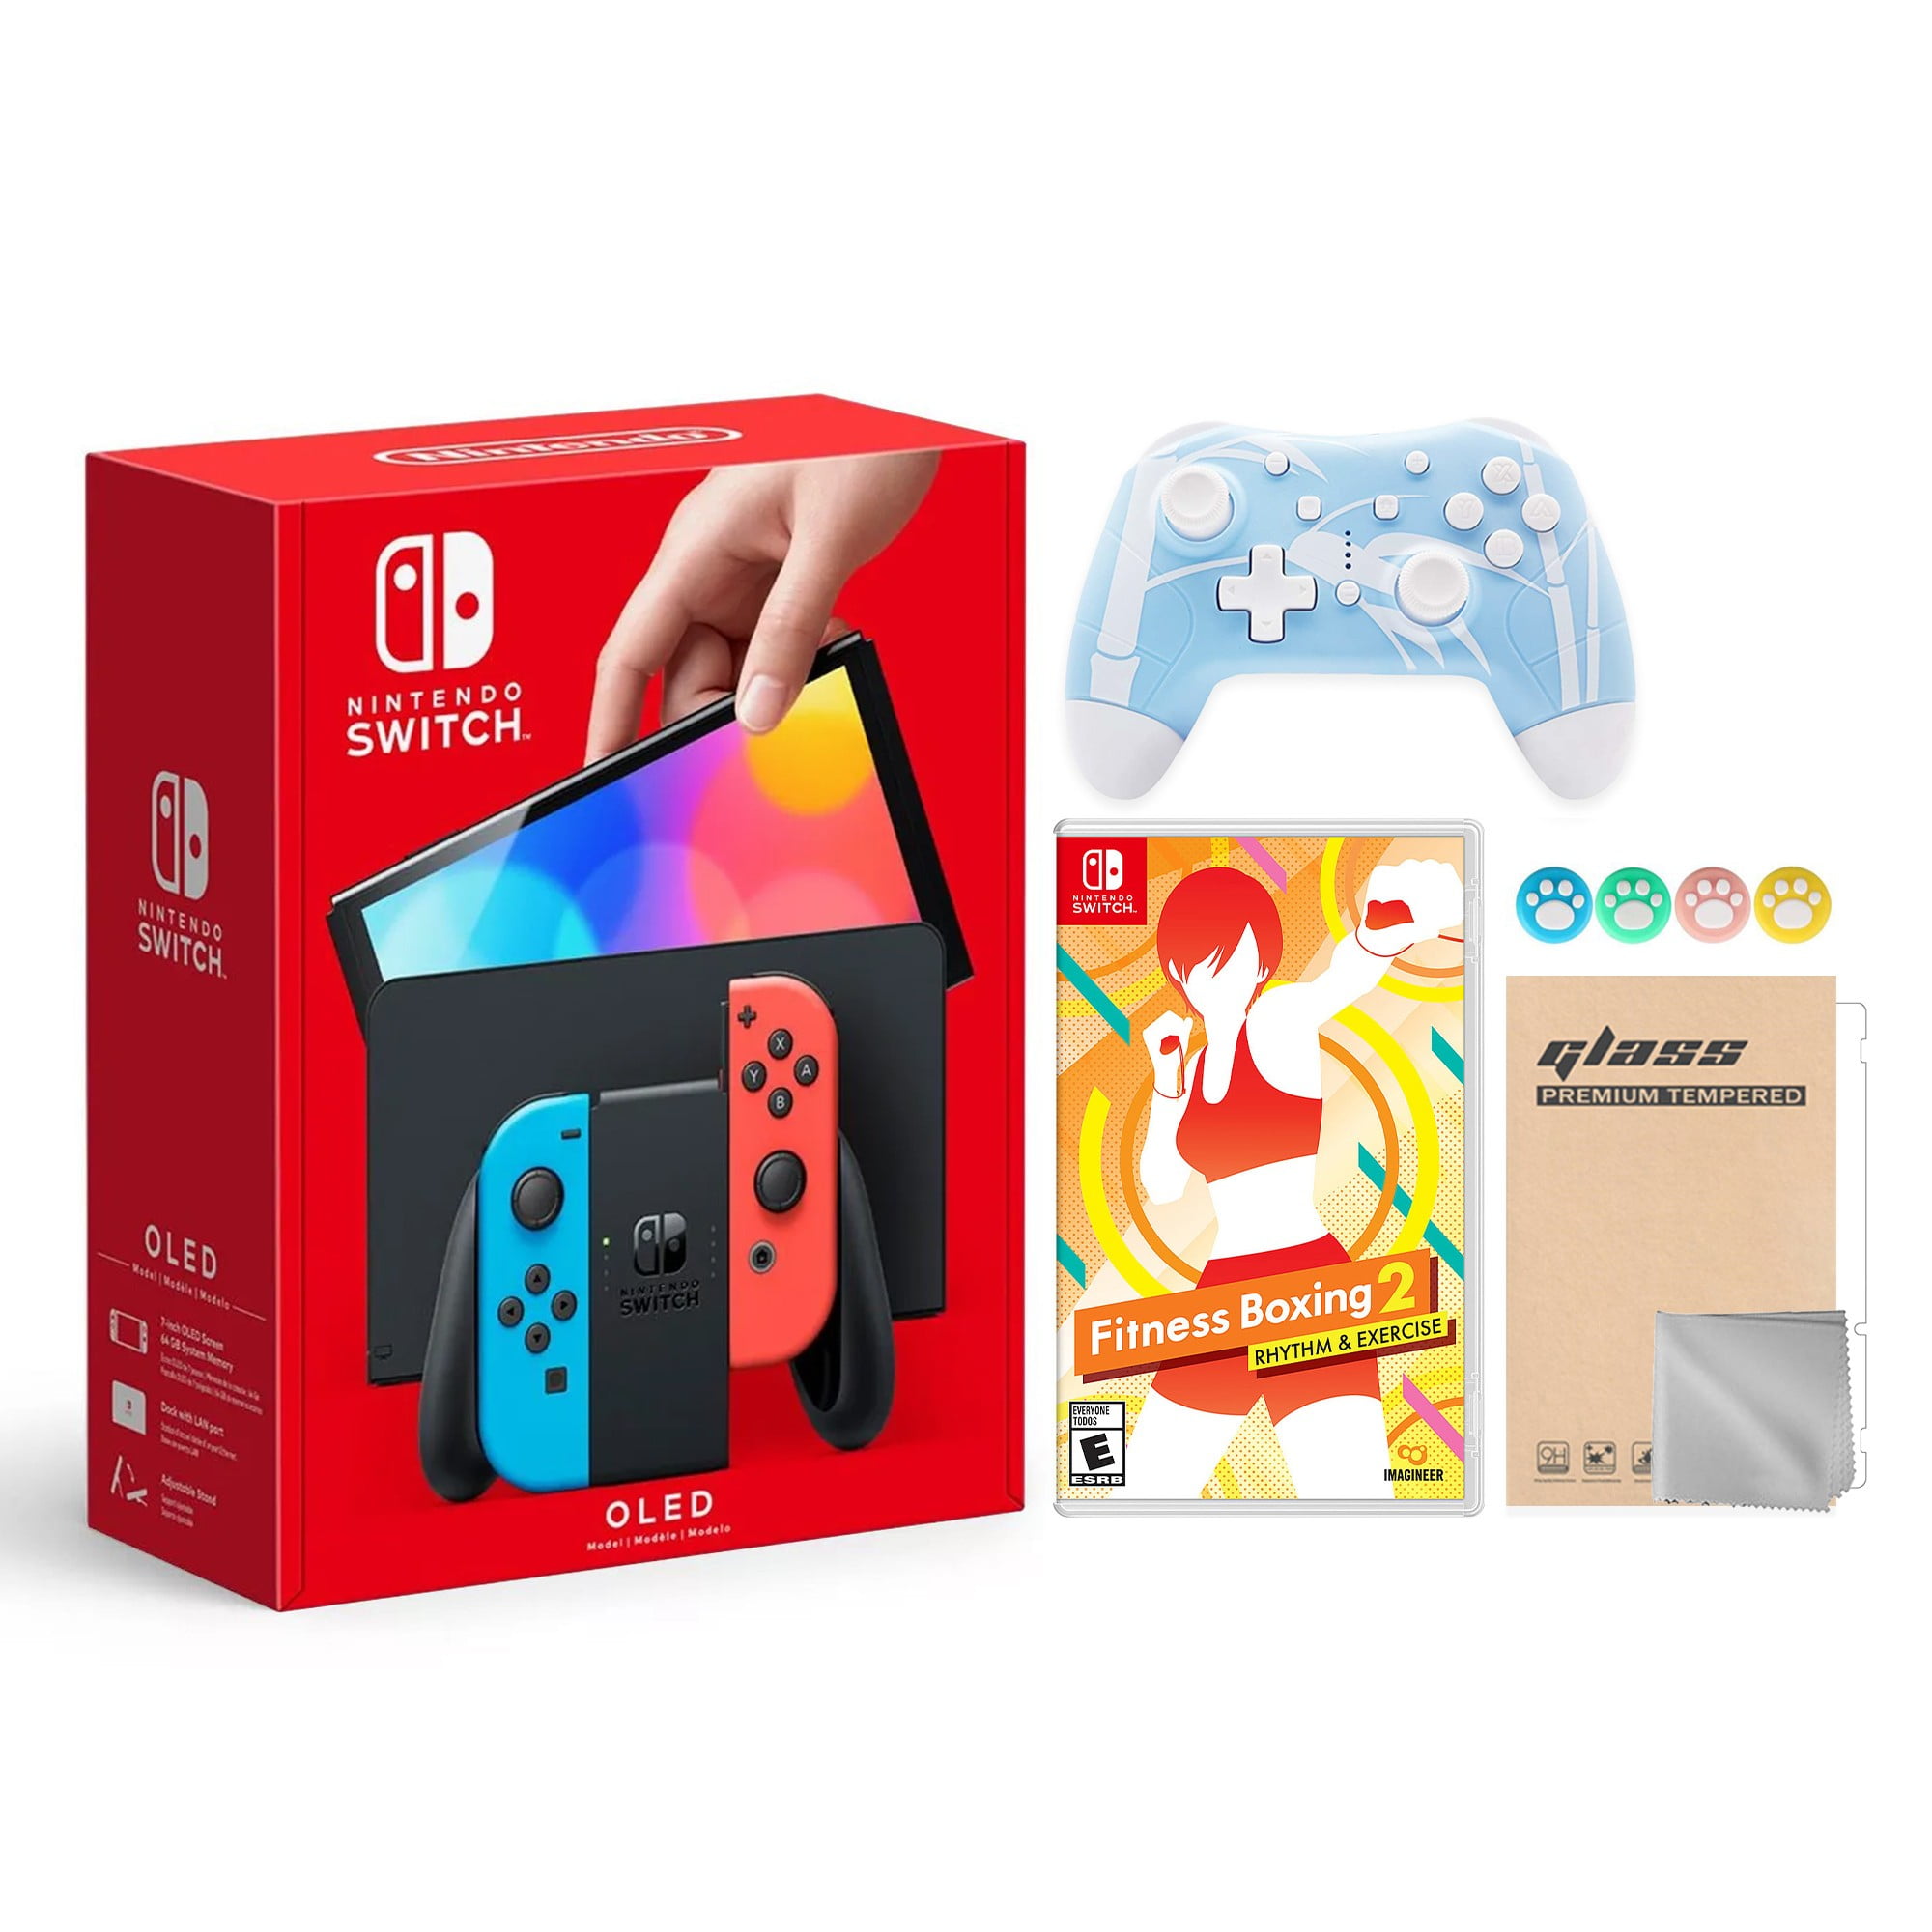 Nintendo Switch OLED Neon Red Blue, Fitness Boxing Palestine